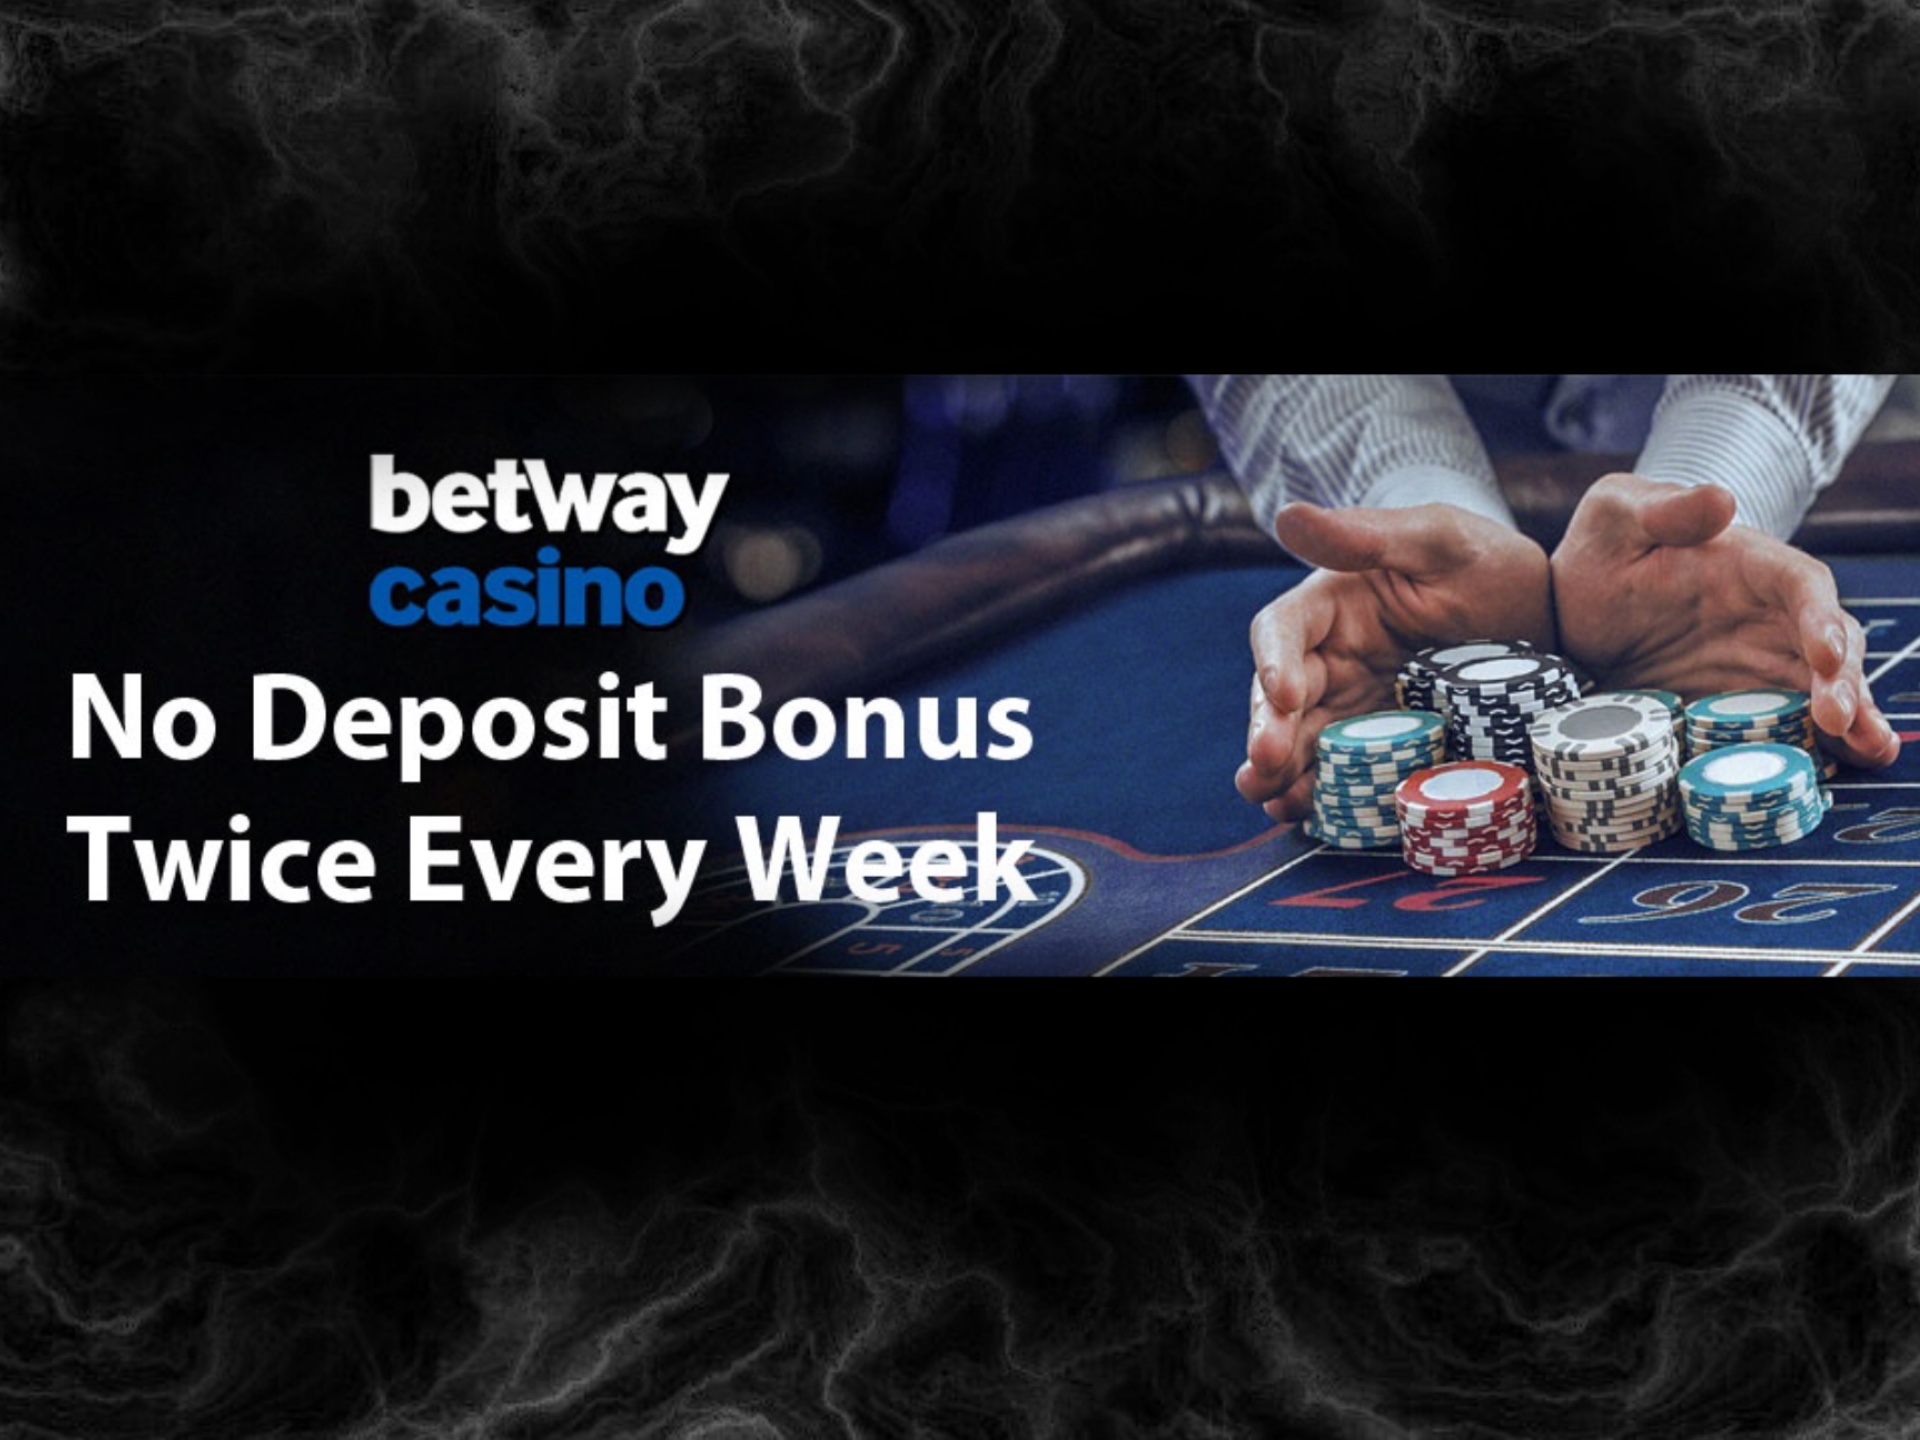 Usually, no deposit is not very big and demands wagering.